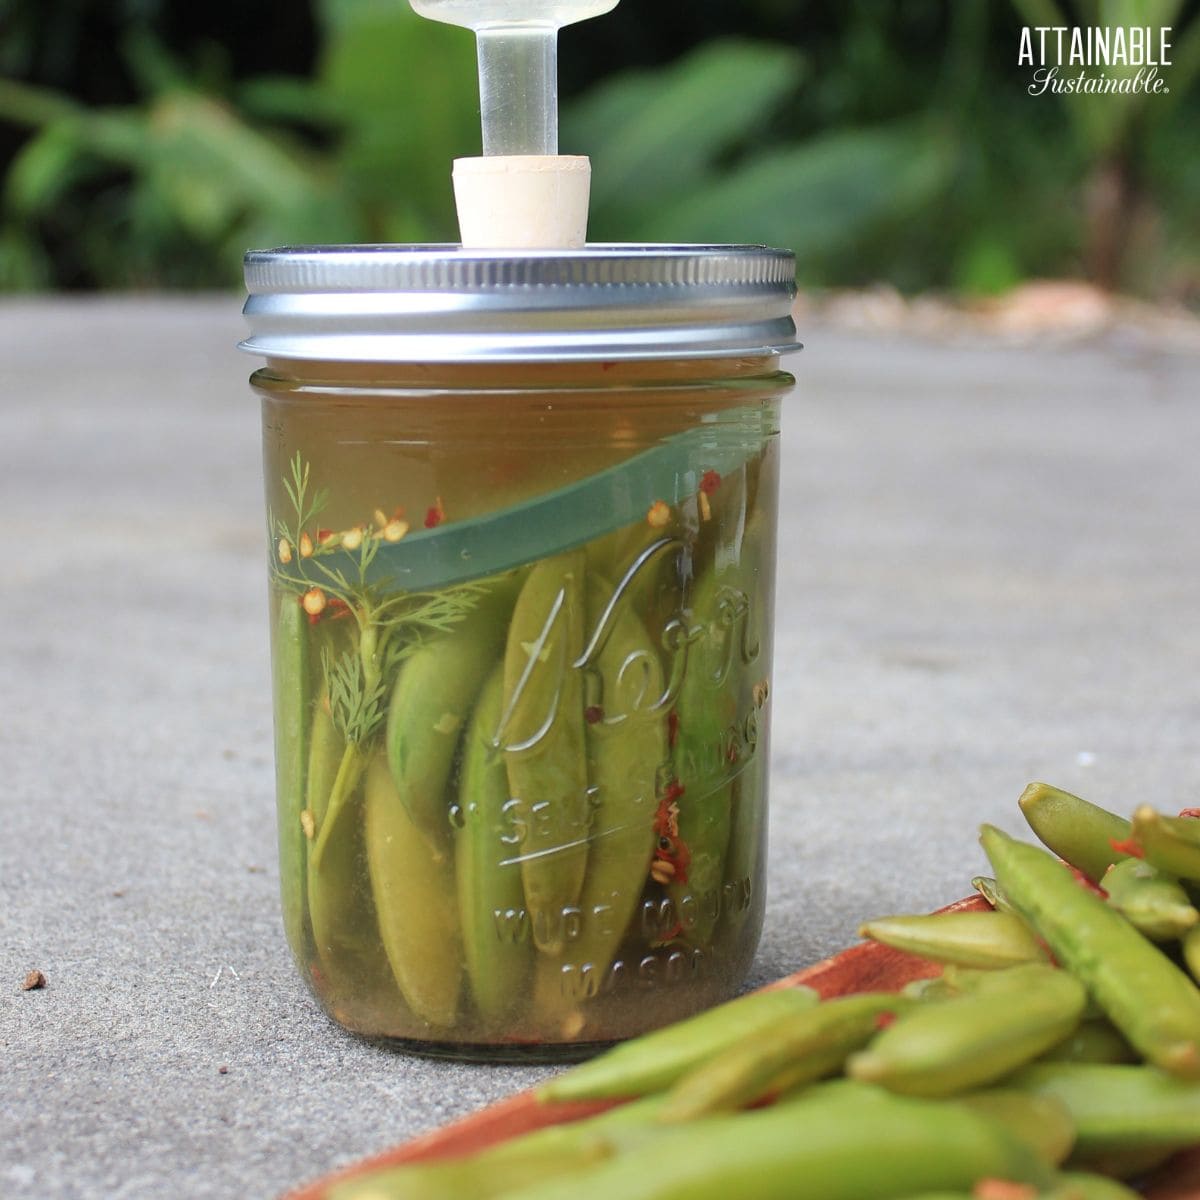 snow peas in a canning jar, glass fermentation weight visible.